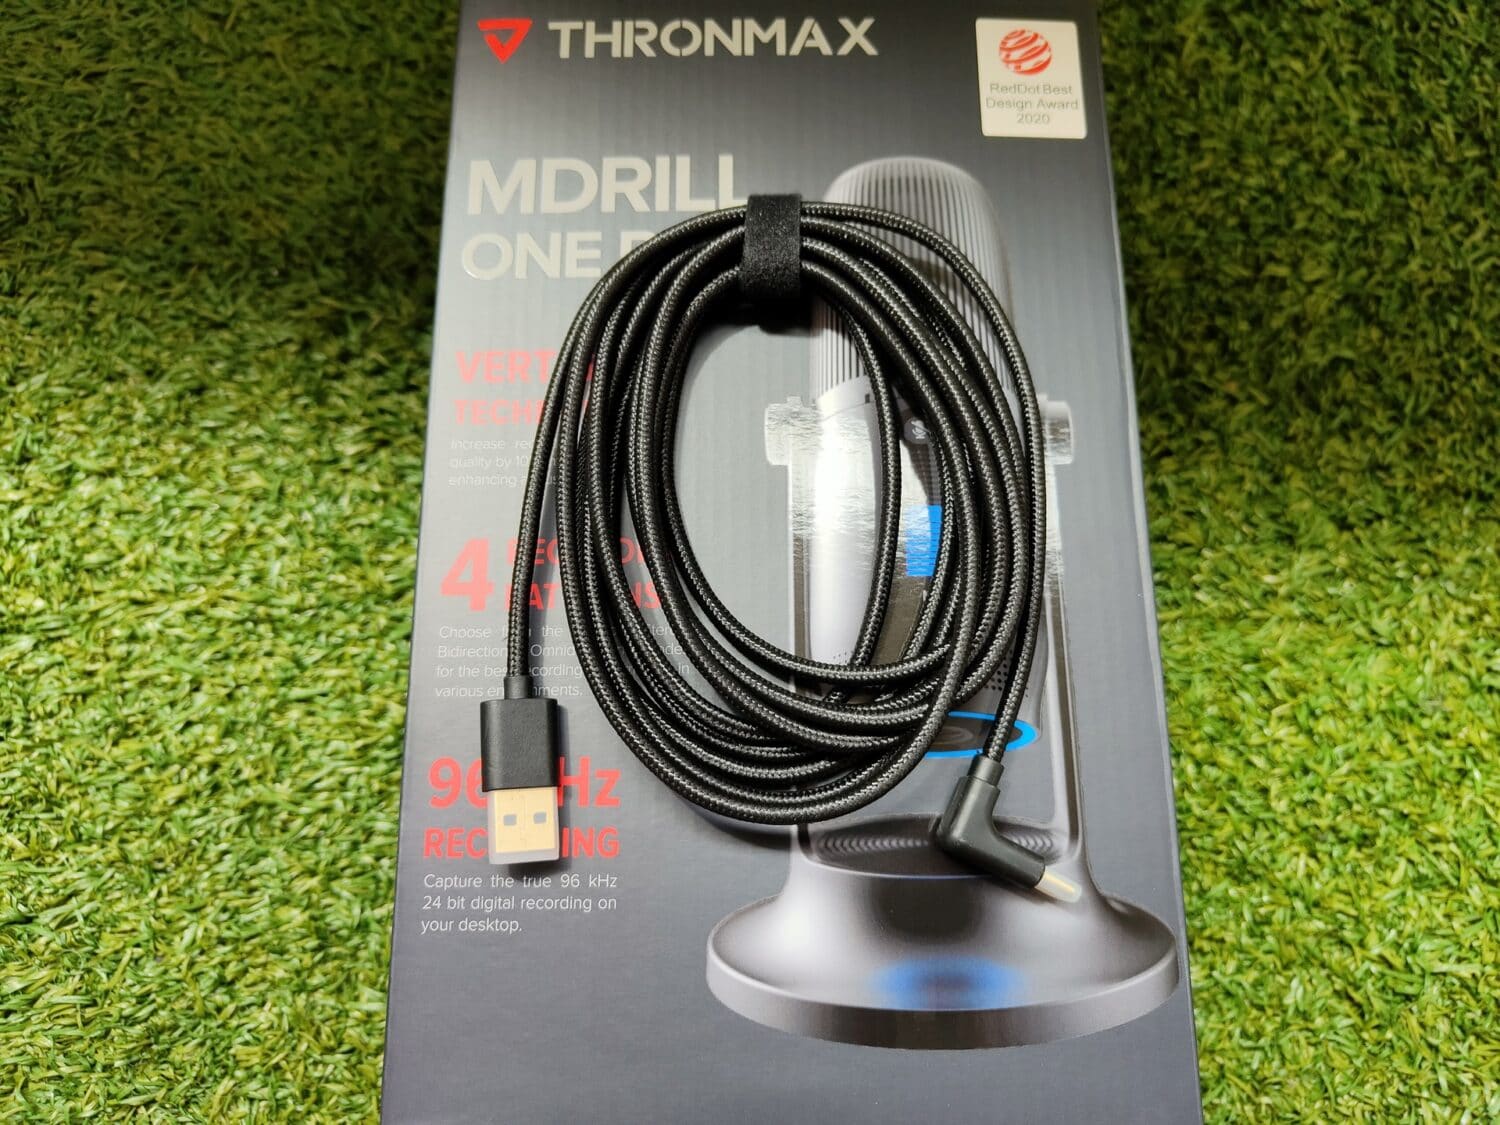 Thronmax MDRILL One Pro